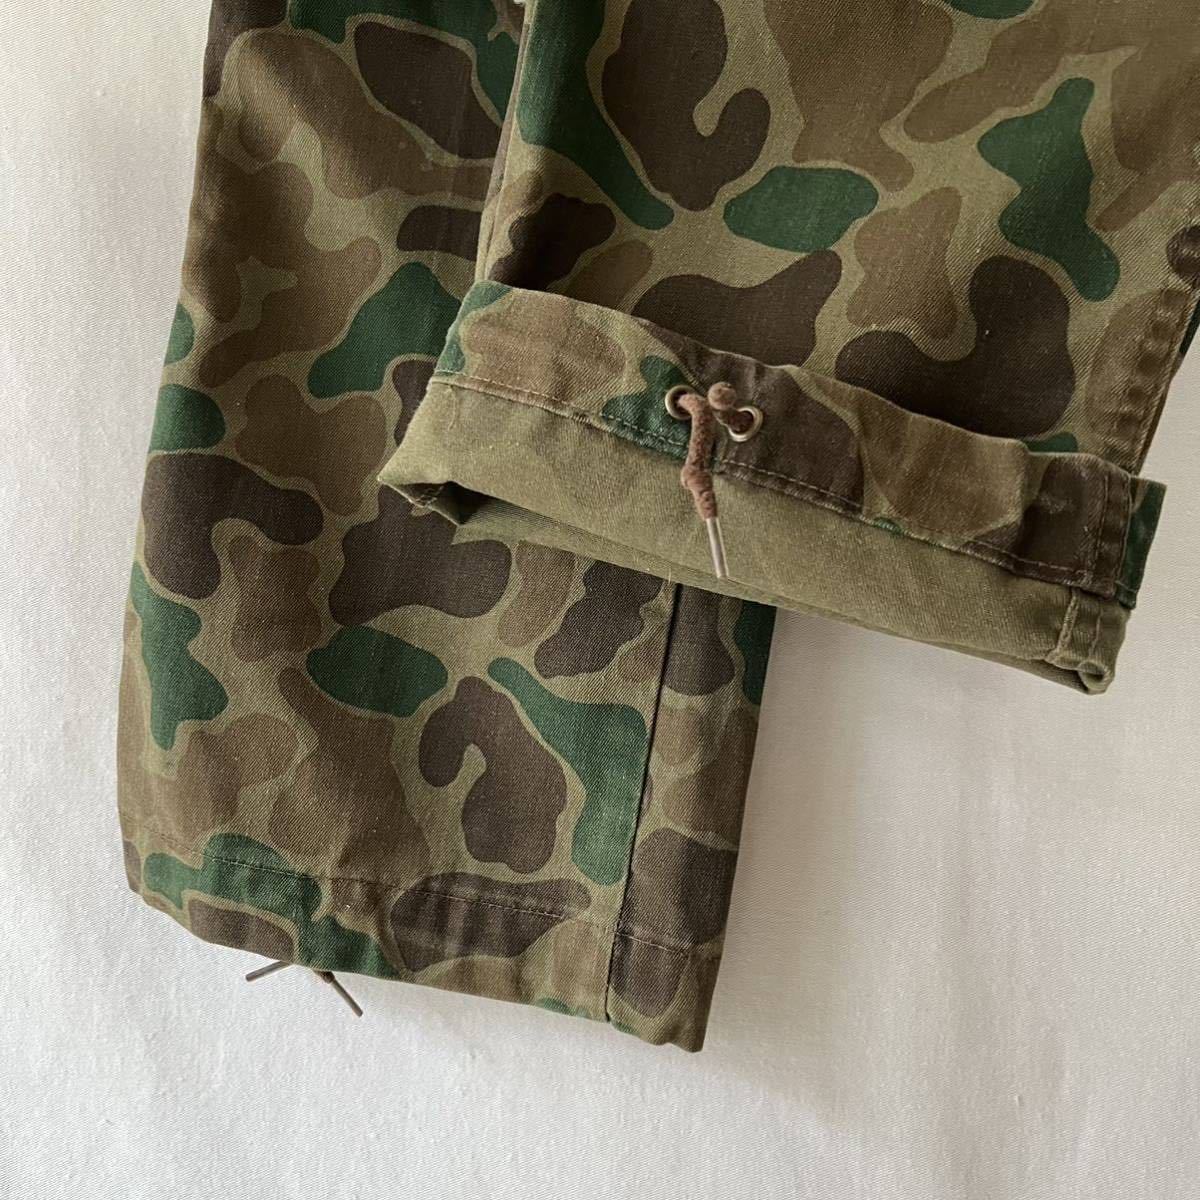 80s WOOLRICH green duck utility pants S USA made Vintage 80 period Woolrich camouflage America made original Vintage 